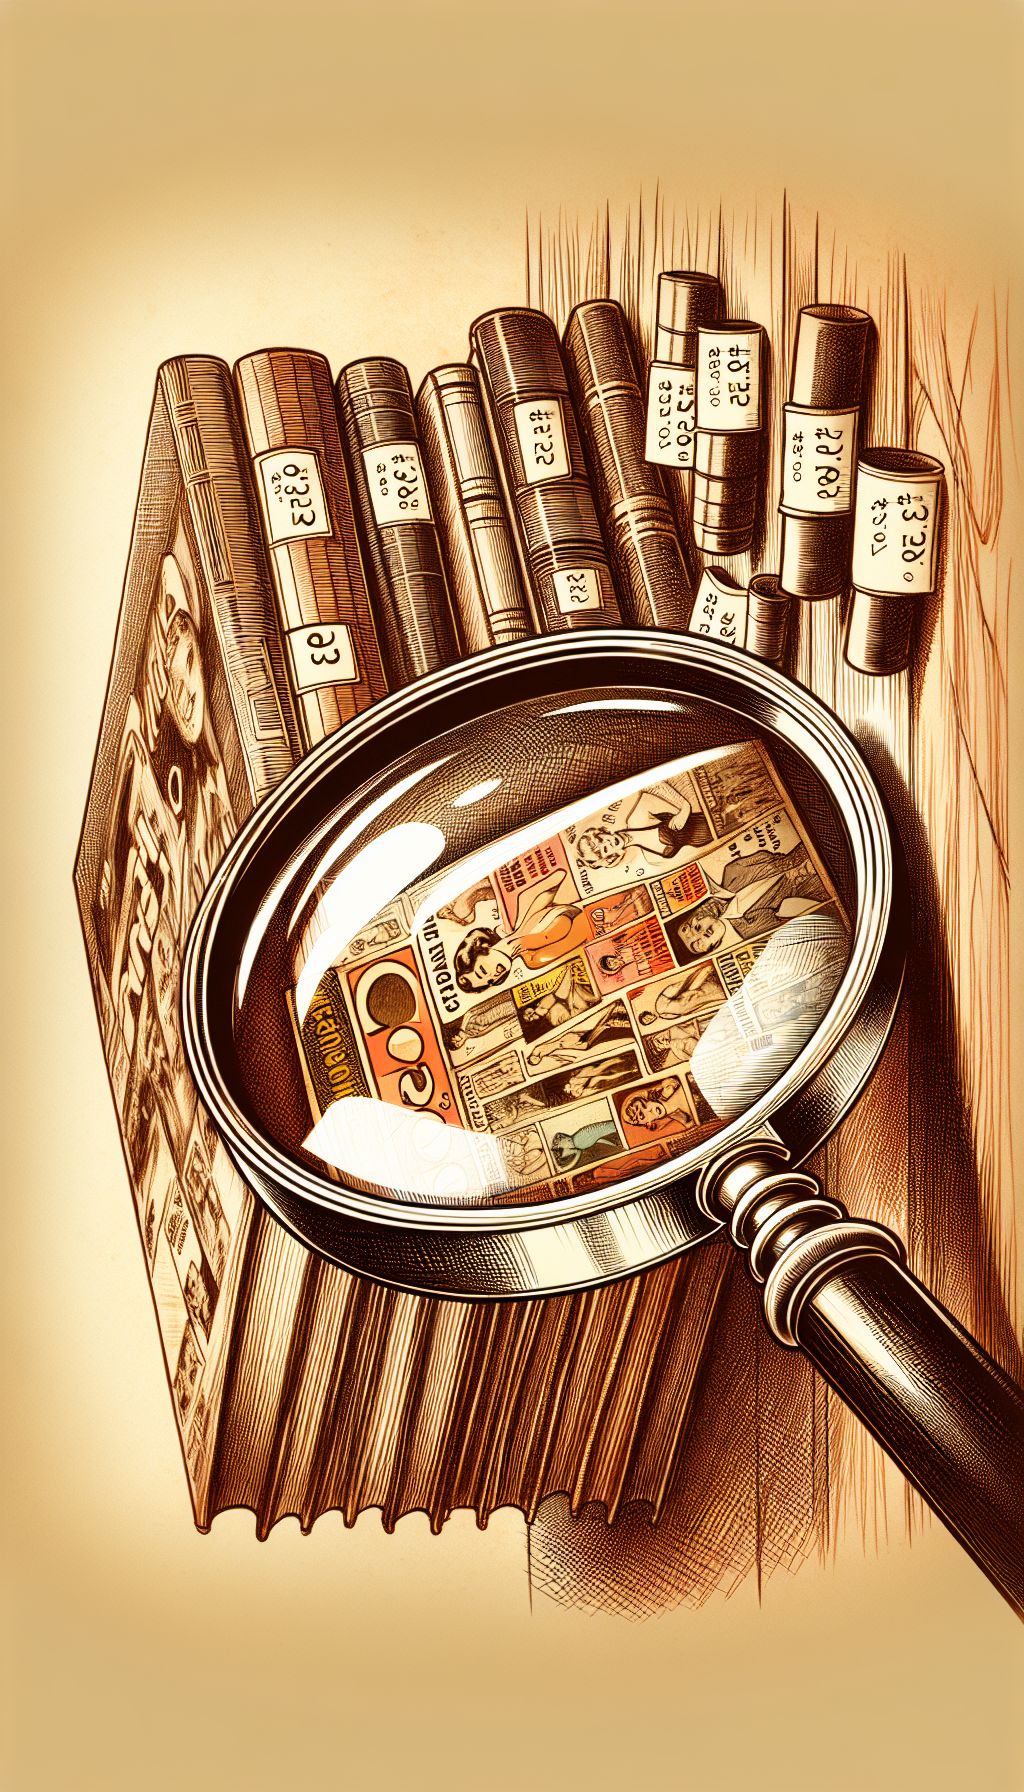 A sepia-toned sketch shows an antique magnifying glass hovering over a neatly aligned collection of vintage Playboy magazines, with price tags subtly increasing as they recede into the background, illustrating the rising value of nostalgia. The magnifying glass reflects the vibrant cover of a pristine, iconic issue, symbolizing the allure and exploration of past cultural treasures.